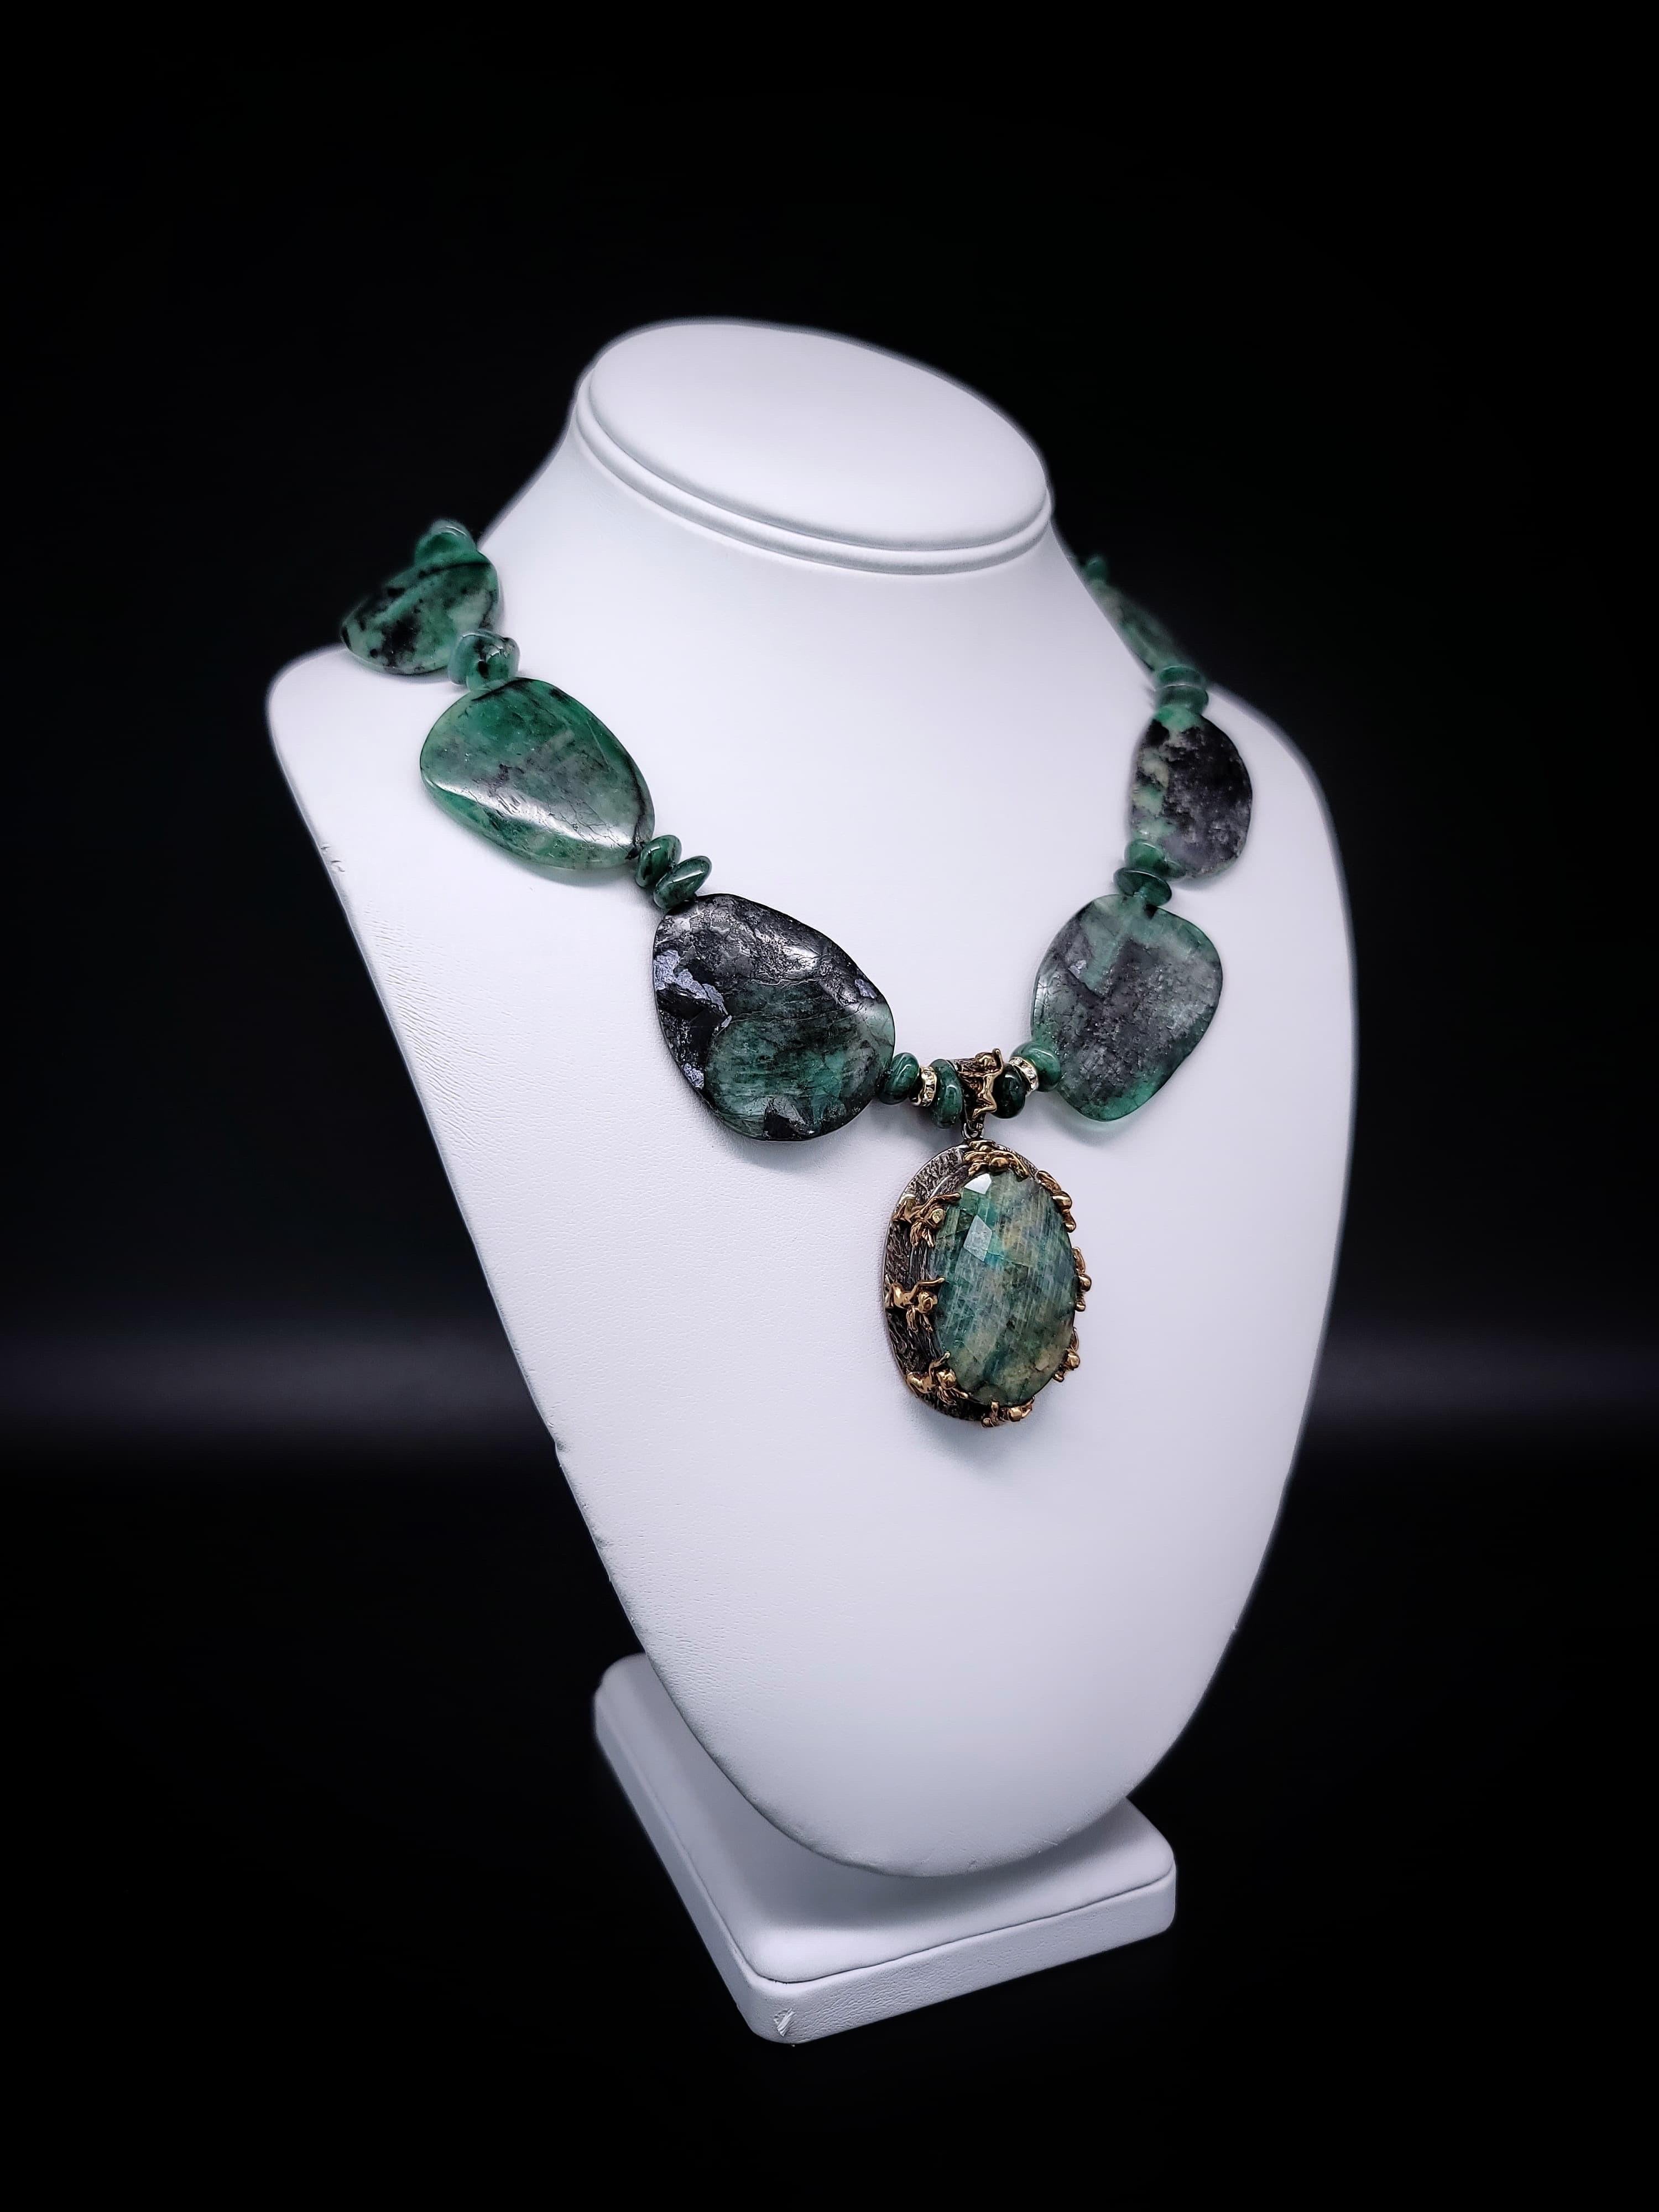 One-of-a-Kind

Behold, is a stunning creation from the Bora atelier - a perfectly proportioned collar of Emeralds designed to rest just below the collar bone, supporting an exquisite pendant meticulously crafted. This silk hand-knotted necklace